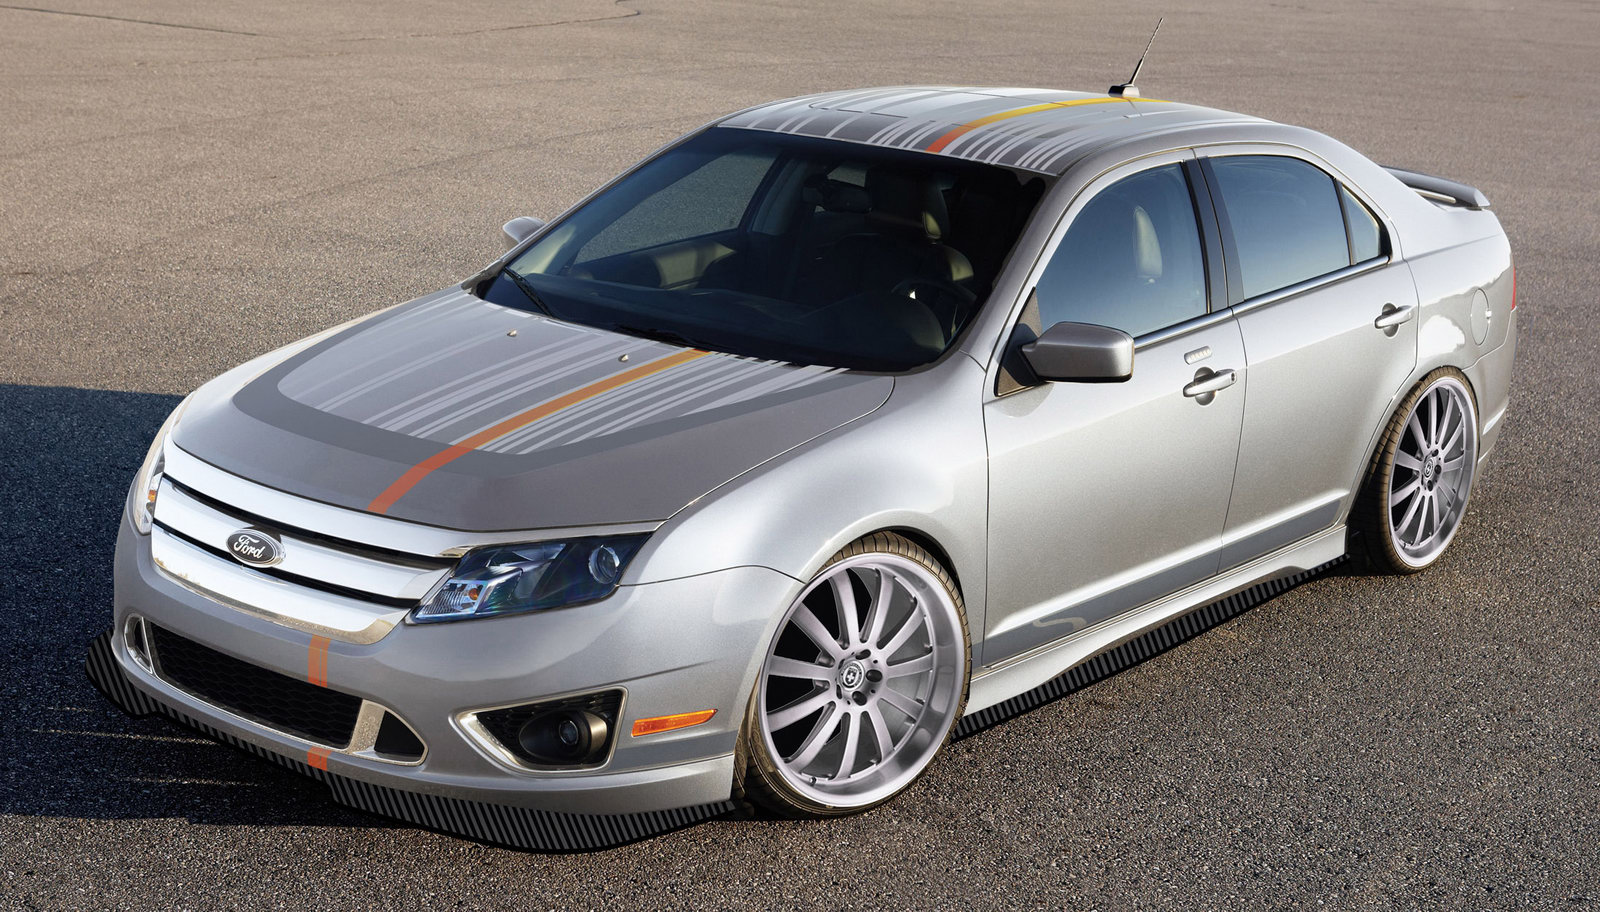 2010 Ford fusion performance upgrades